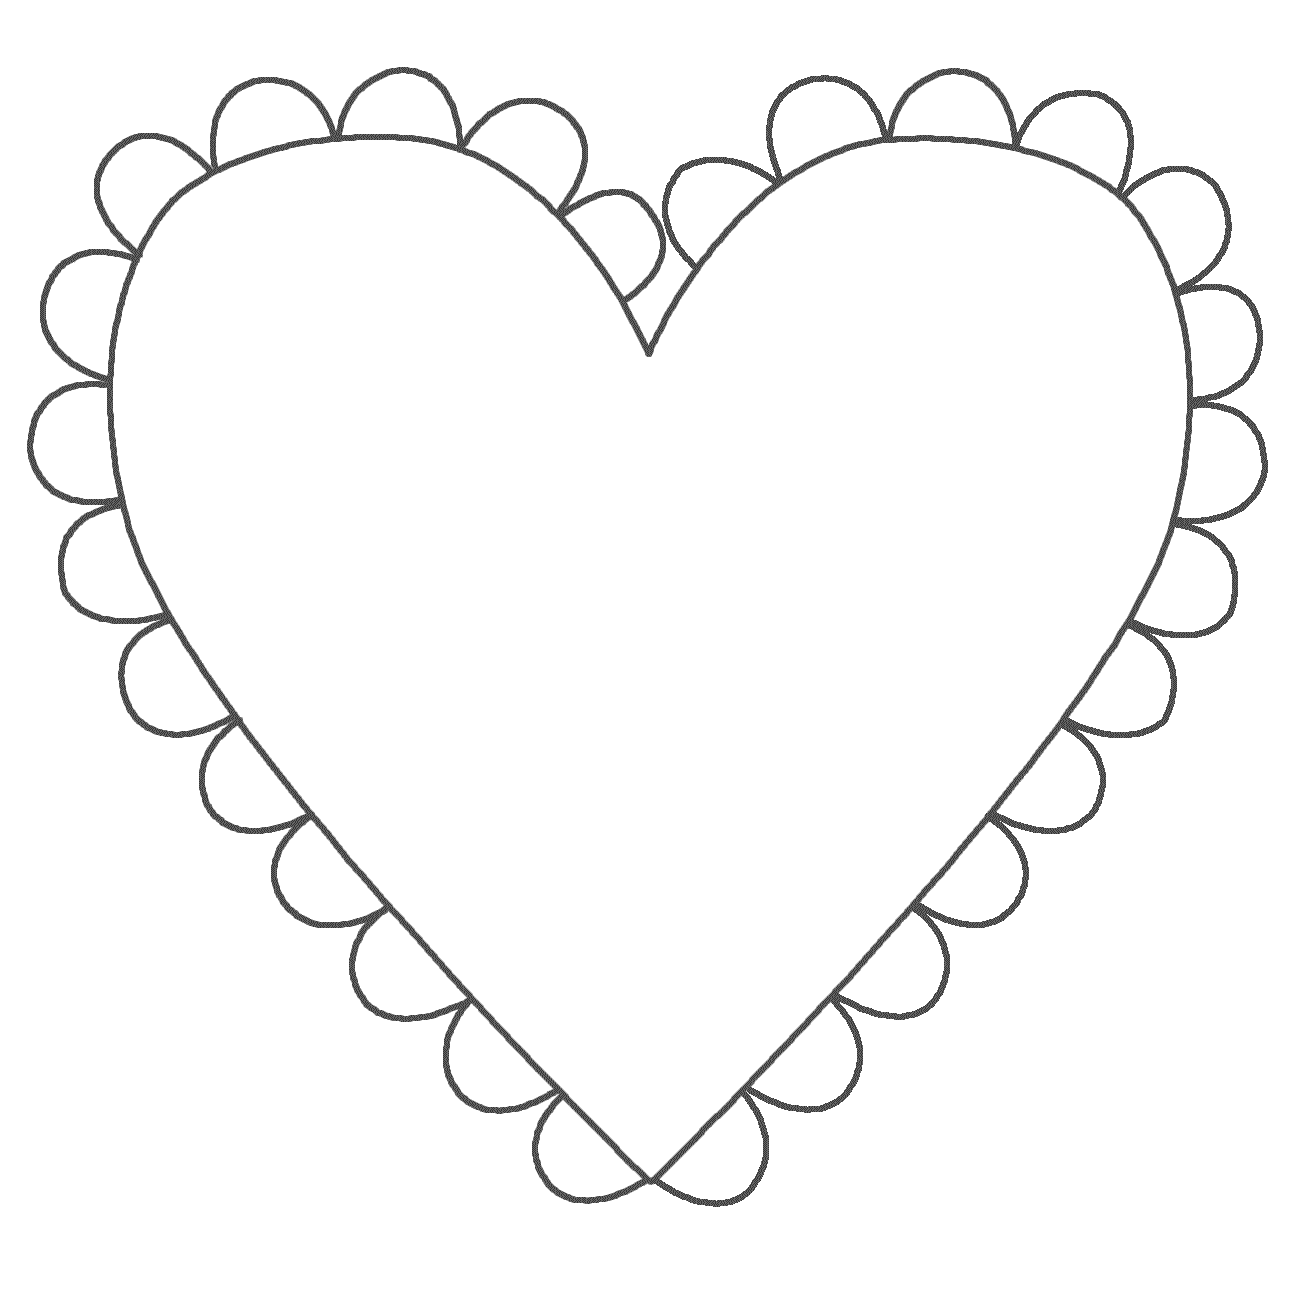 10 Printable Heart Outline Free Cliparts That You Can Download To You    